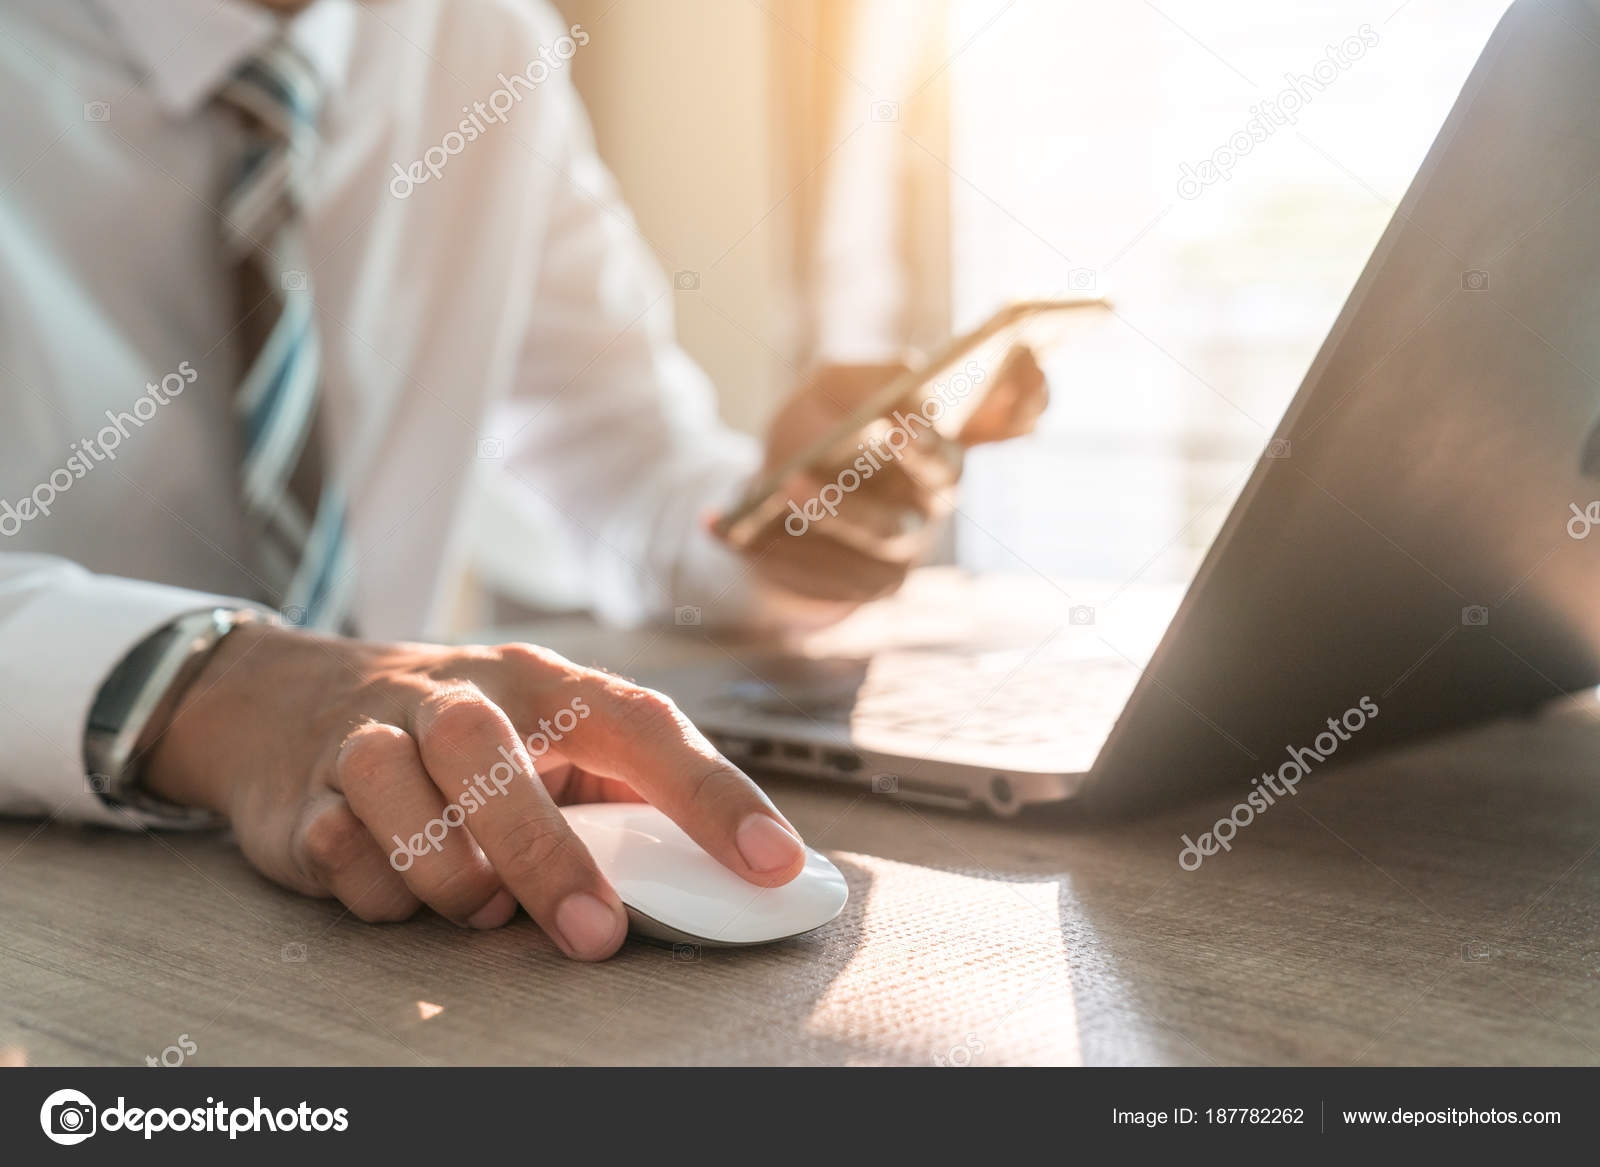 Male Hand Holding Computer Mouse With Laptop Keyboard In The Bac